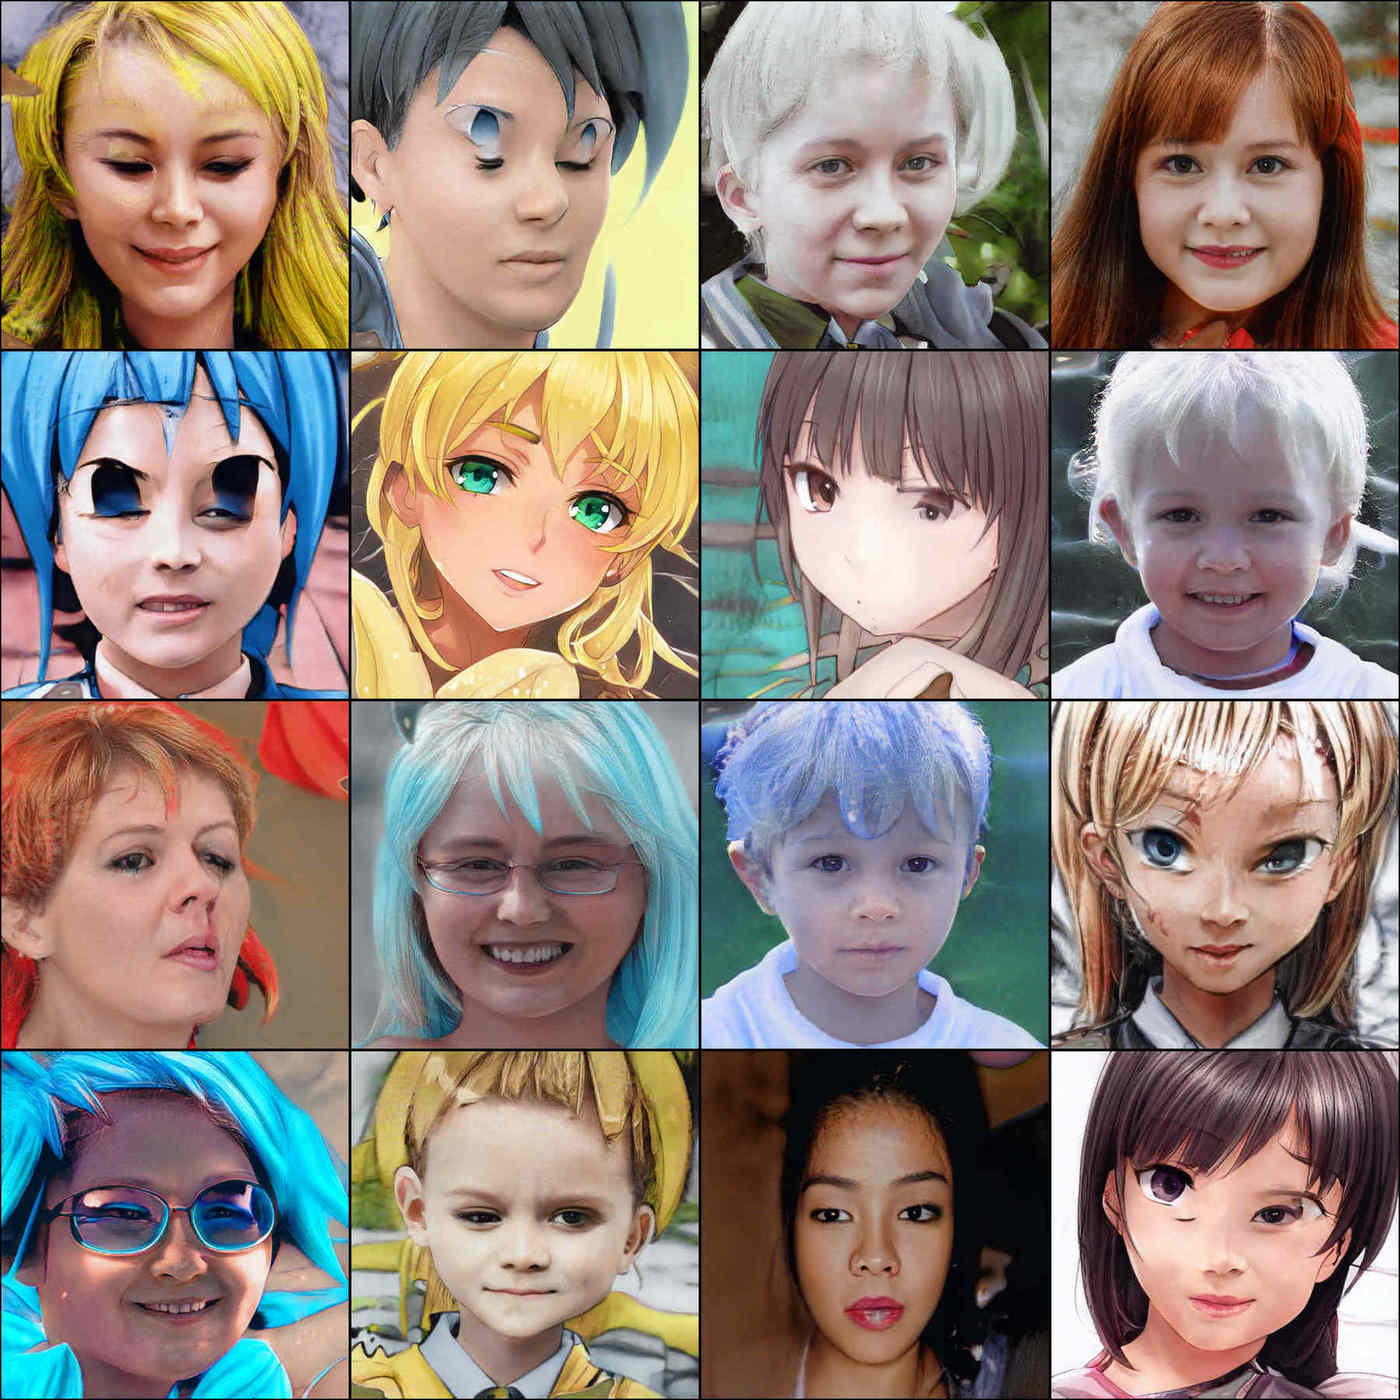 Selected samples from the anime+FFHQ StyleGAN, showing curious ‘intermediate’ faces (4×4 grid)